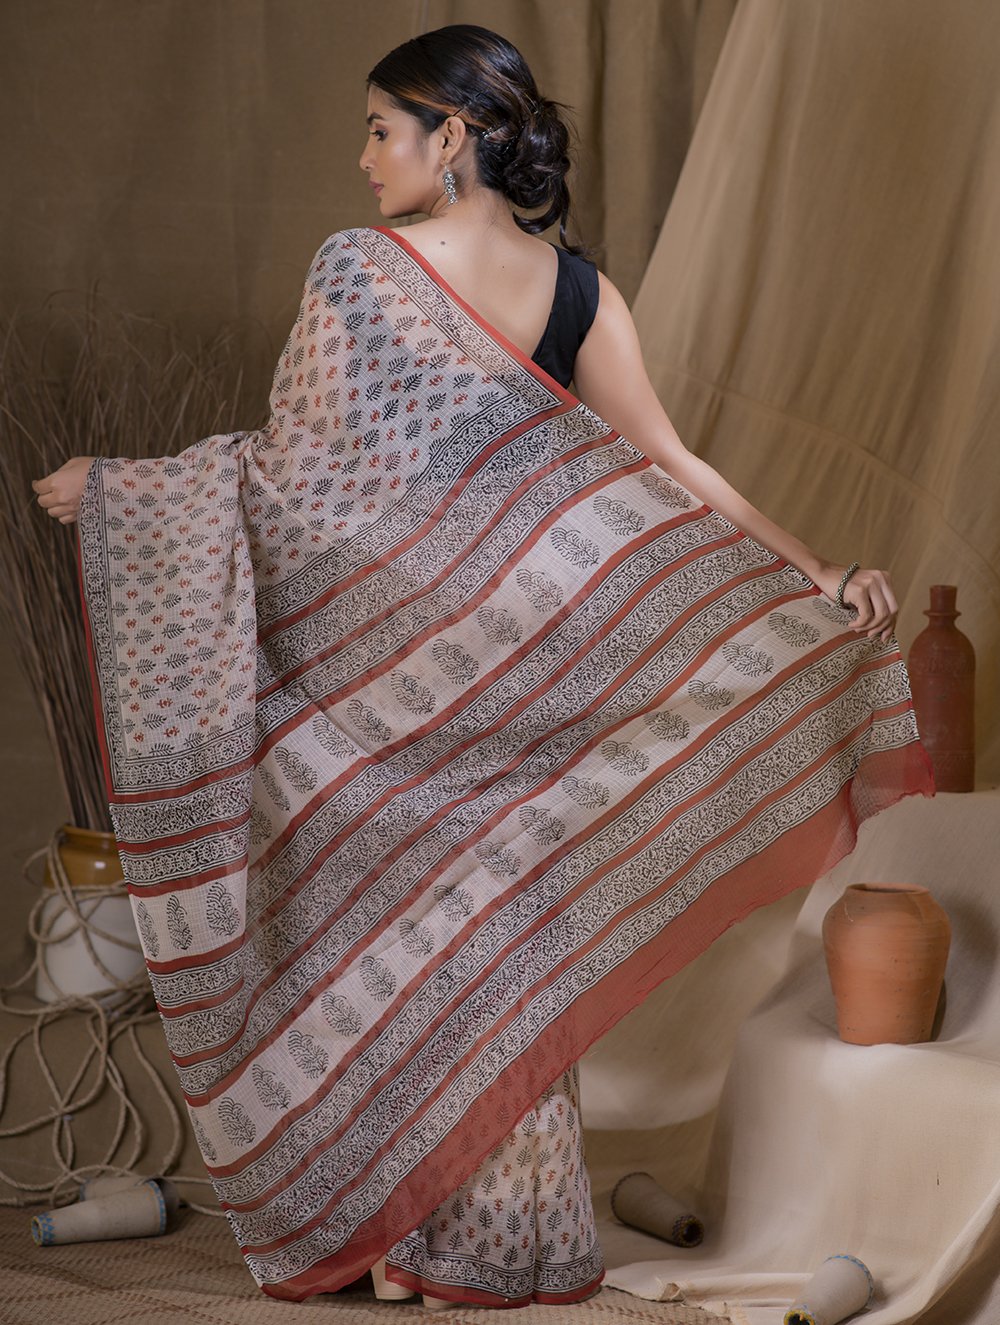 Load image into Gallery viewer, Light &amp; Cool. Bagru Block Printed Kota Doria Saree - Leaf &amp; Posy  (Without Blouse Piece)